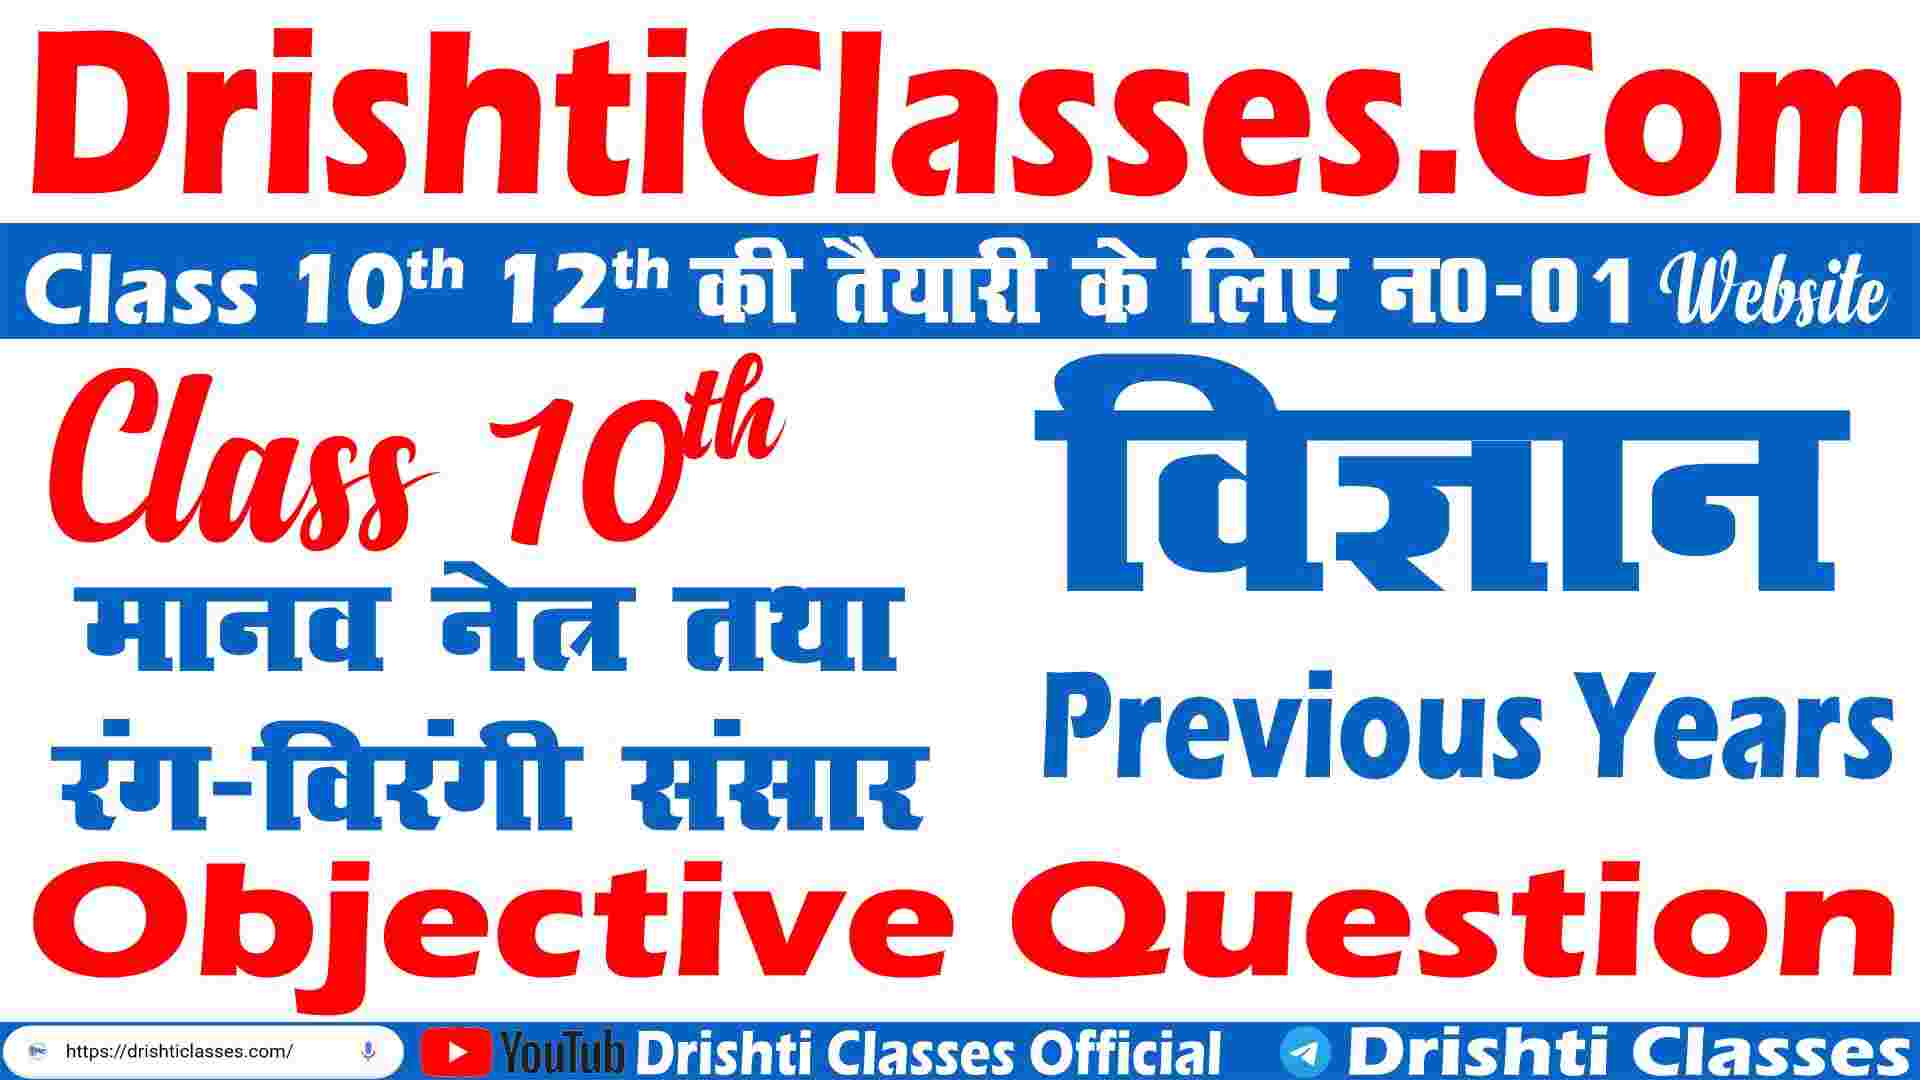 Class 10th Science Physics Chapter 2 Objective Question Answer, Class 10th Science Chapter 2 Objective Question Answer,Class 10th Science Objective Question Answer